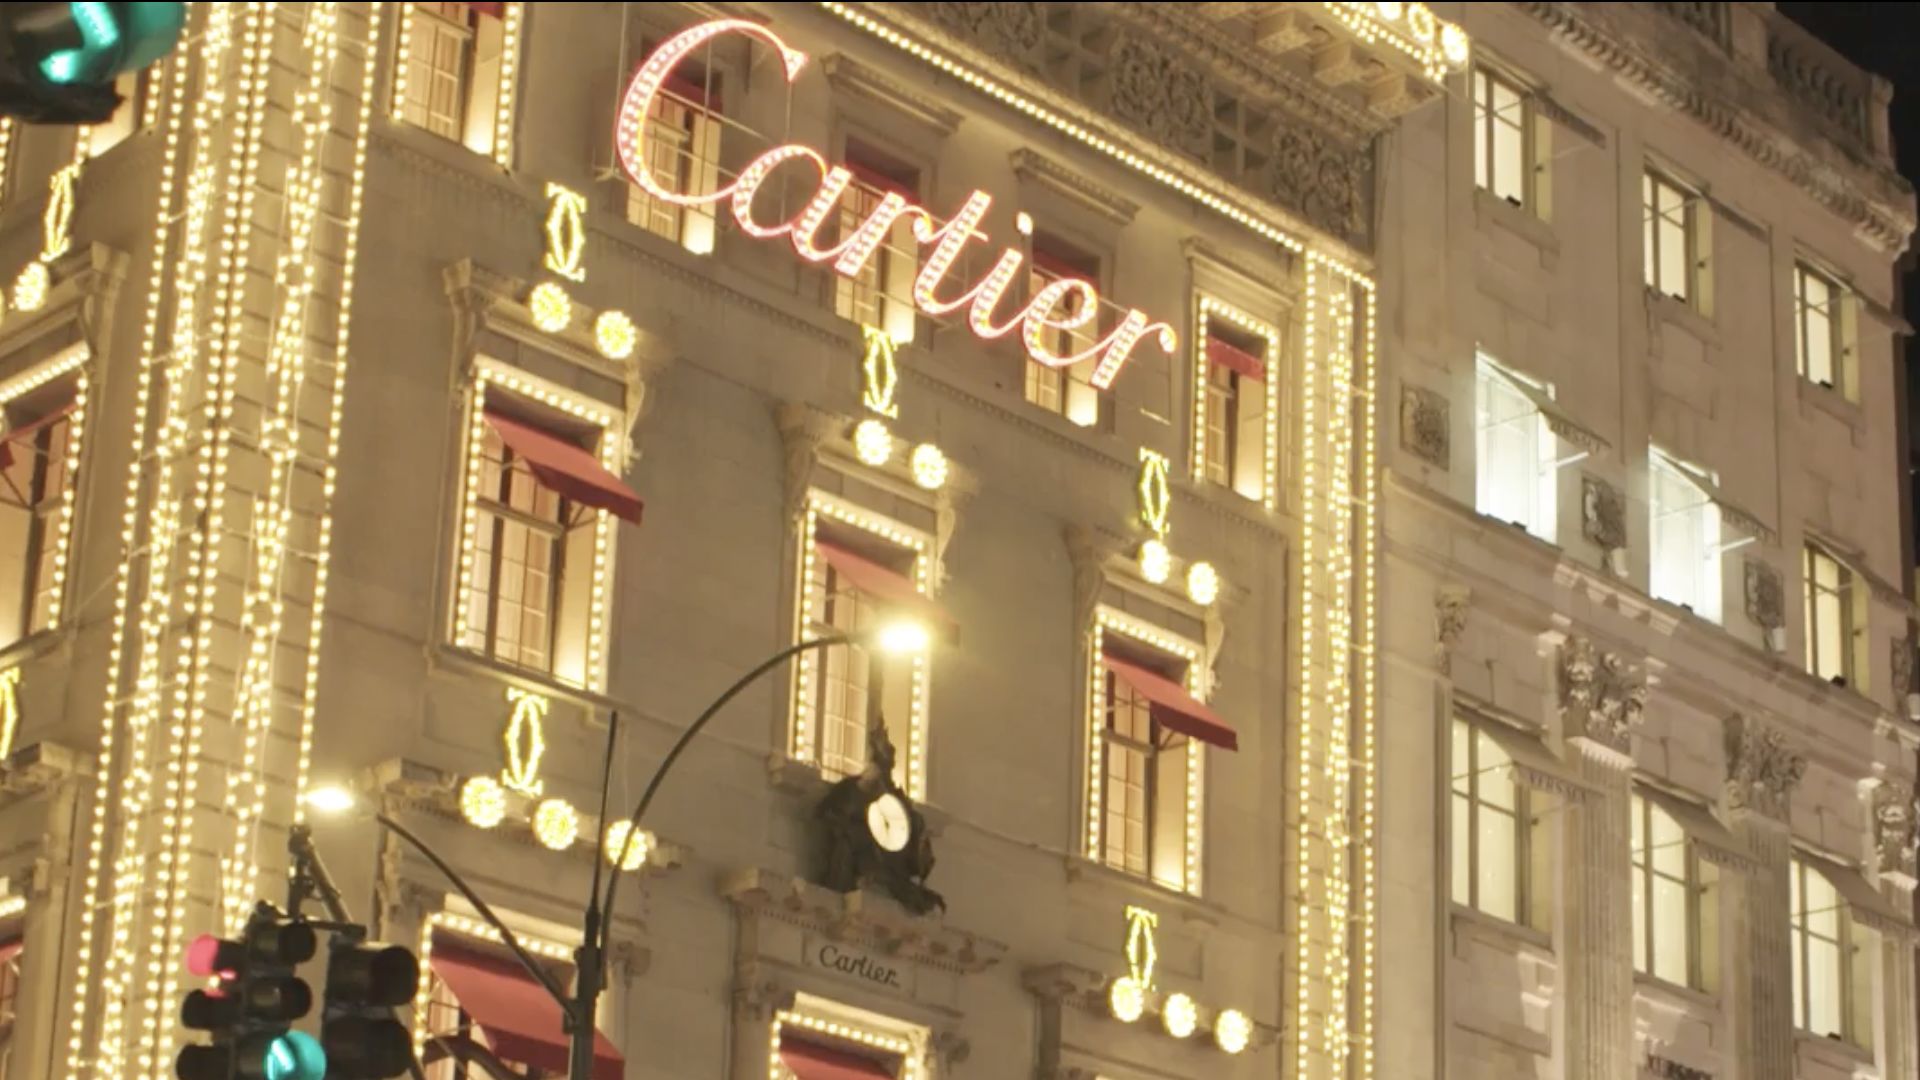 Cartier main New York by